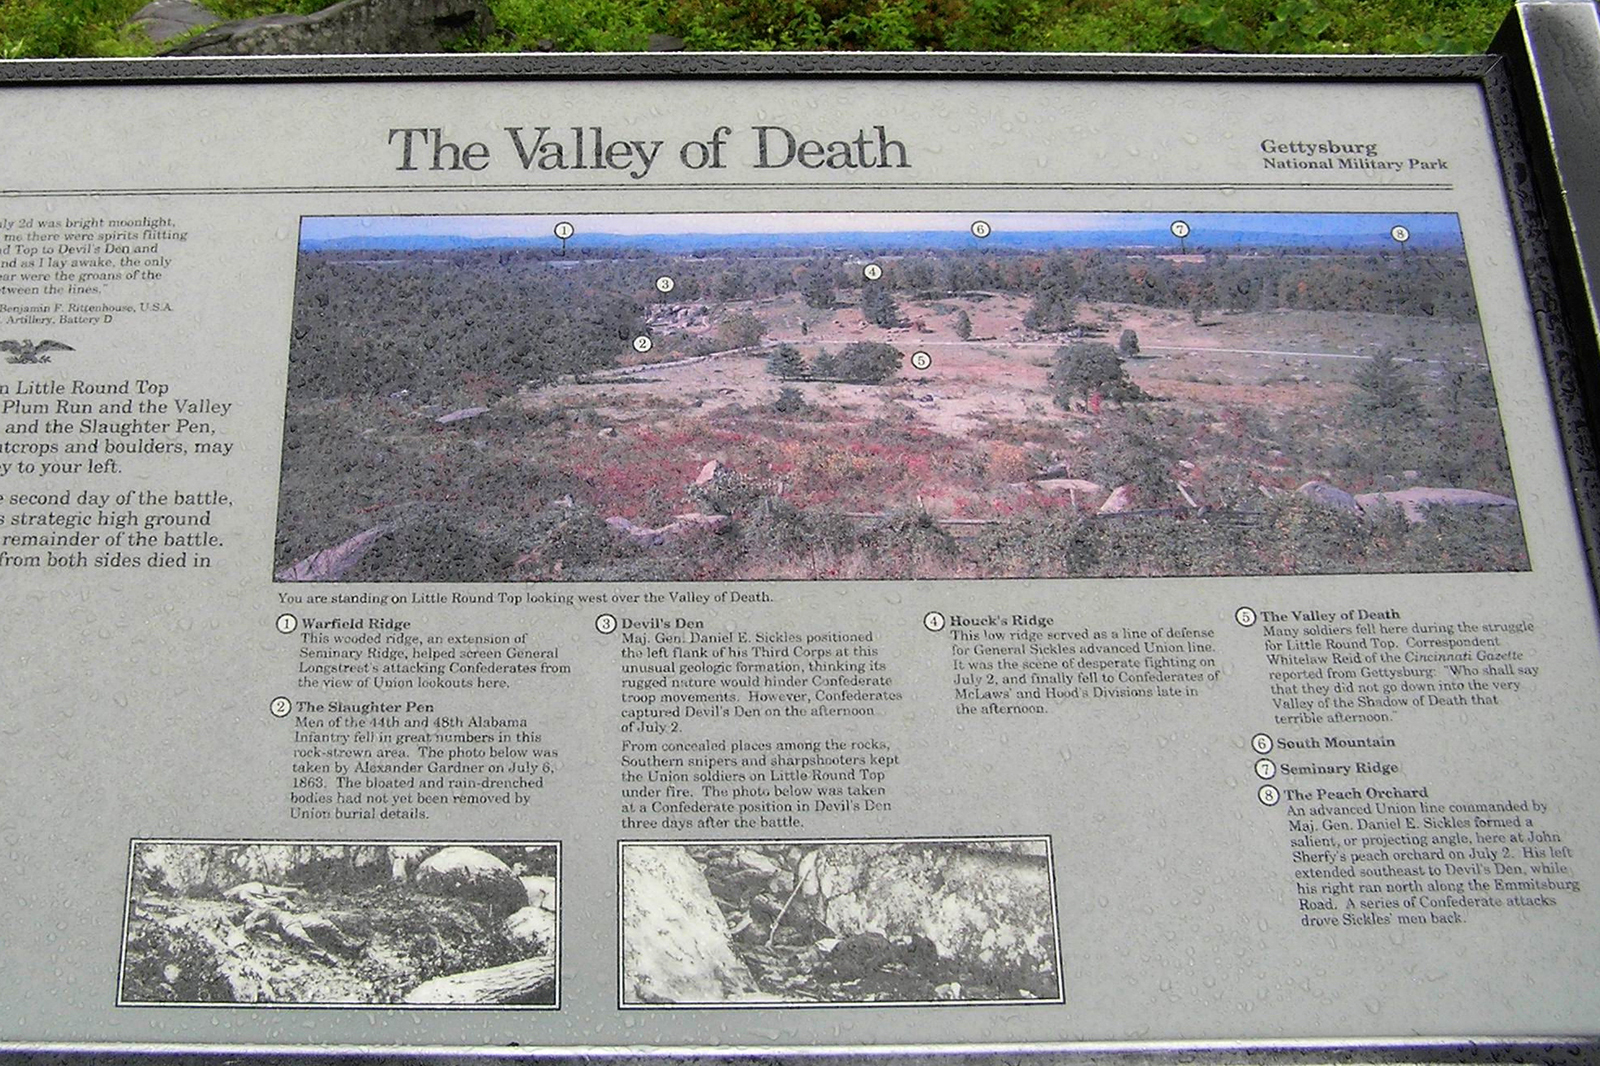 The Valley of Death